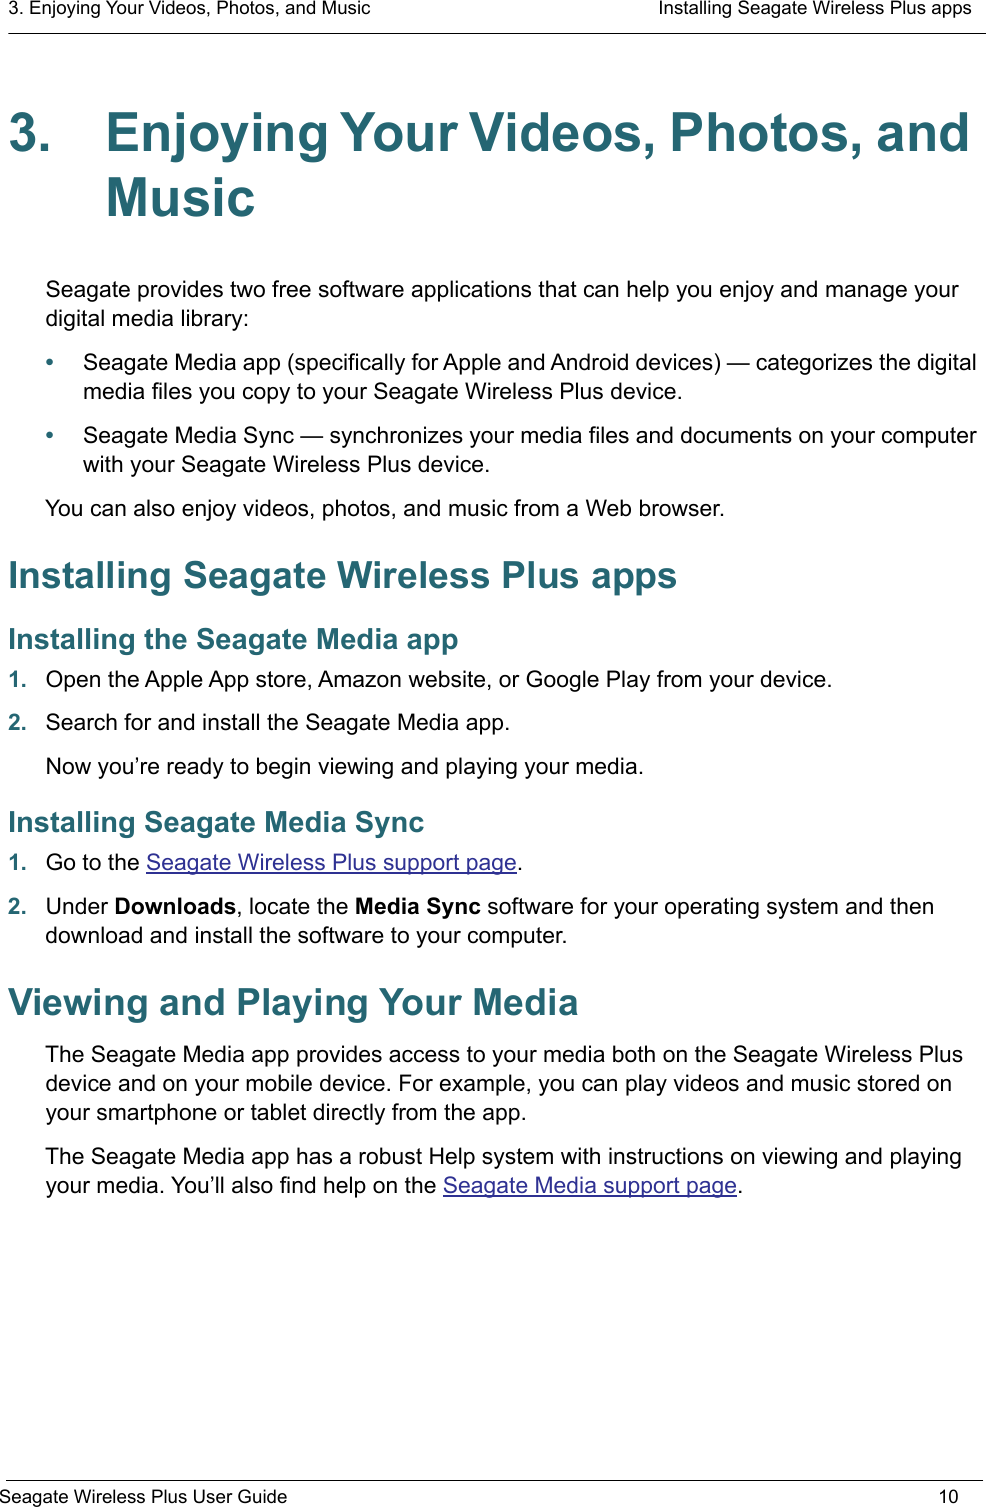 3. Enjoying Your Videos, Photos, and Music  Installing Seagate Wireless Plus appsSeagate Wireless Plus User Guide 103. Enjoying Your Videos, Photos, and MusicSeagate provides two free software applications that can help you enjoy and manage your digital media library:•Seagate Media app (specifically for Apple and Android devices) — categorizes the digital media files you copy to your Seagate Wireless Plus device. •Seagate Media Sync — synchronizes your media files and documents on your computer with your Seagate Wireless Plus device.You can also enjoy videos, photos, and music from a Web browser. Installing Seagate Wireless Plus appsInstalling the Seagate Media app1. Open the Apple App store, Amazon website, or Google Play from your device.2. Search for and install the Seagate Media app.Now you’re ready to begin viewing and playing your media.Installing Seagate Media Sync1. Go to the Seagate Wireless Plus support page.2. Under Downloads, locate the Media Sync software for your operating system and then download and install the software to your computer.Viewing and Playing Your MediaThe Seagate Media app provides access to your media both on the Seagate Wireless Plus device and on your mobile device. For example, you can play videos and music stored on your smartphone or tablet directly from the app.The Seagate Media app has a robust Help system with instructions on viewing and playing your media. You’ll also find help on the Seagate Media support page.